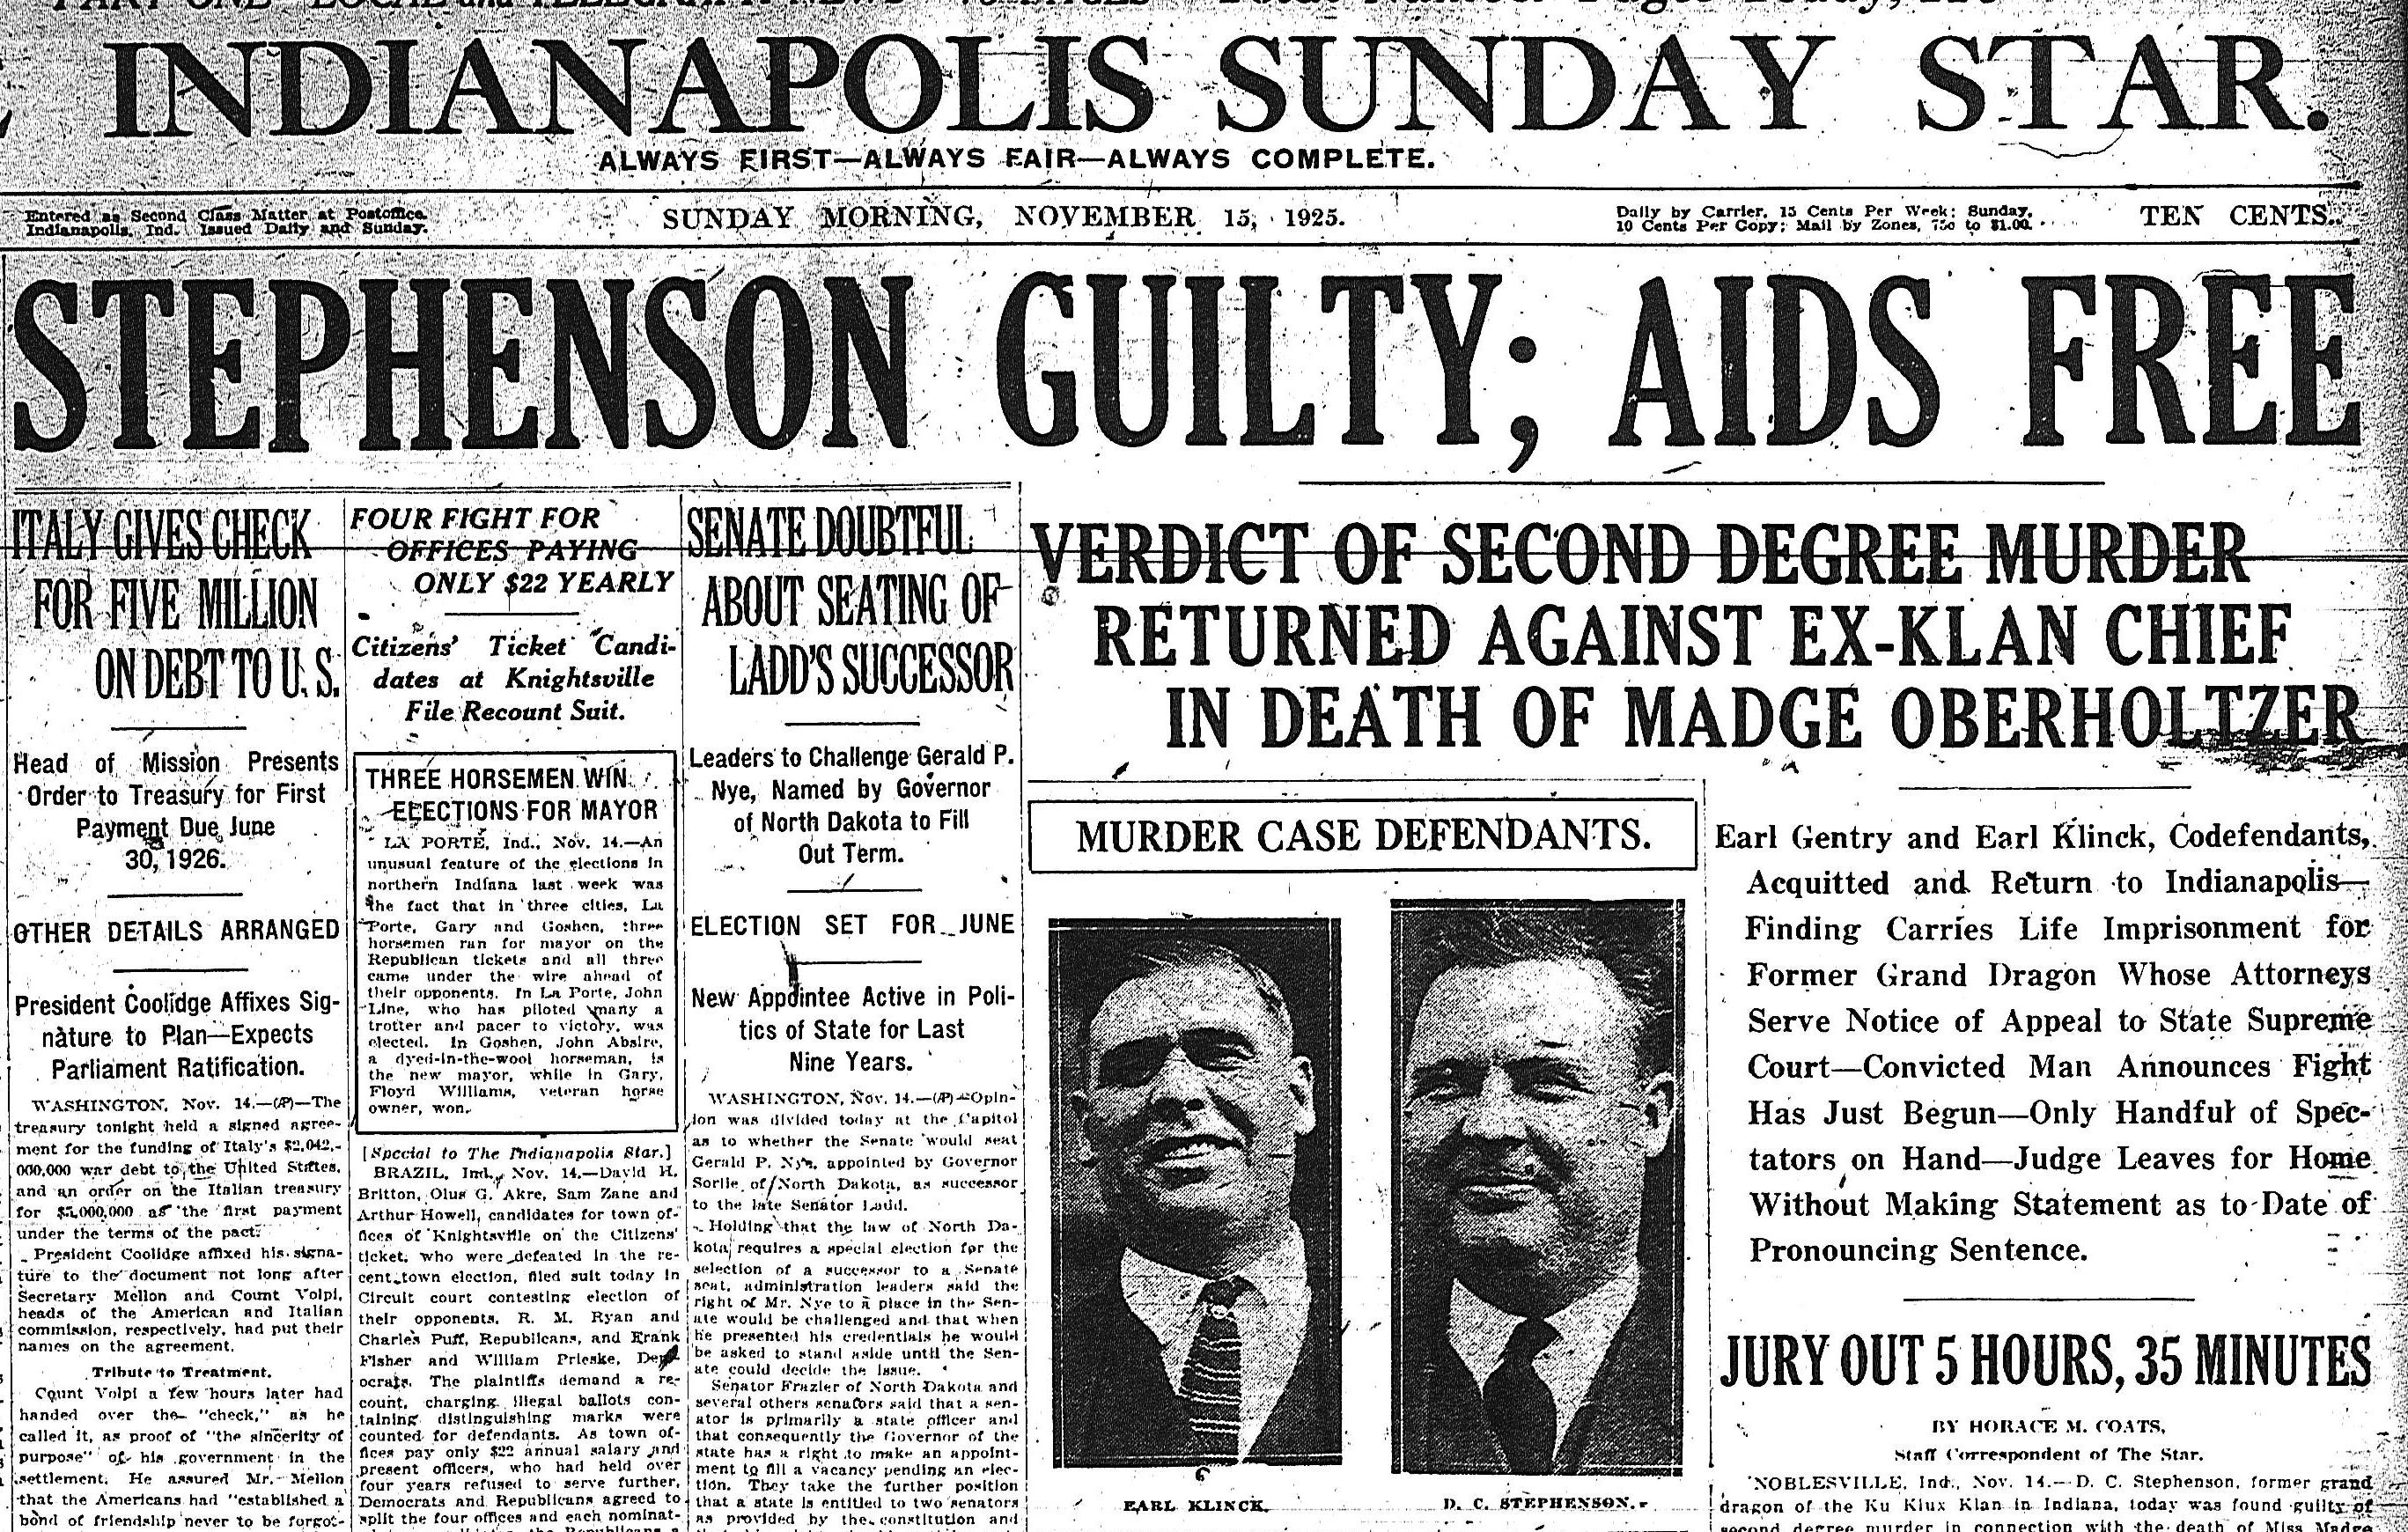 The murder of Madge Oberholtzer: Rape, poison and the KKK